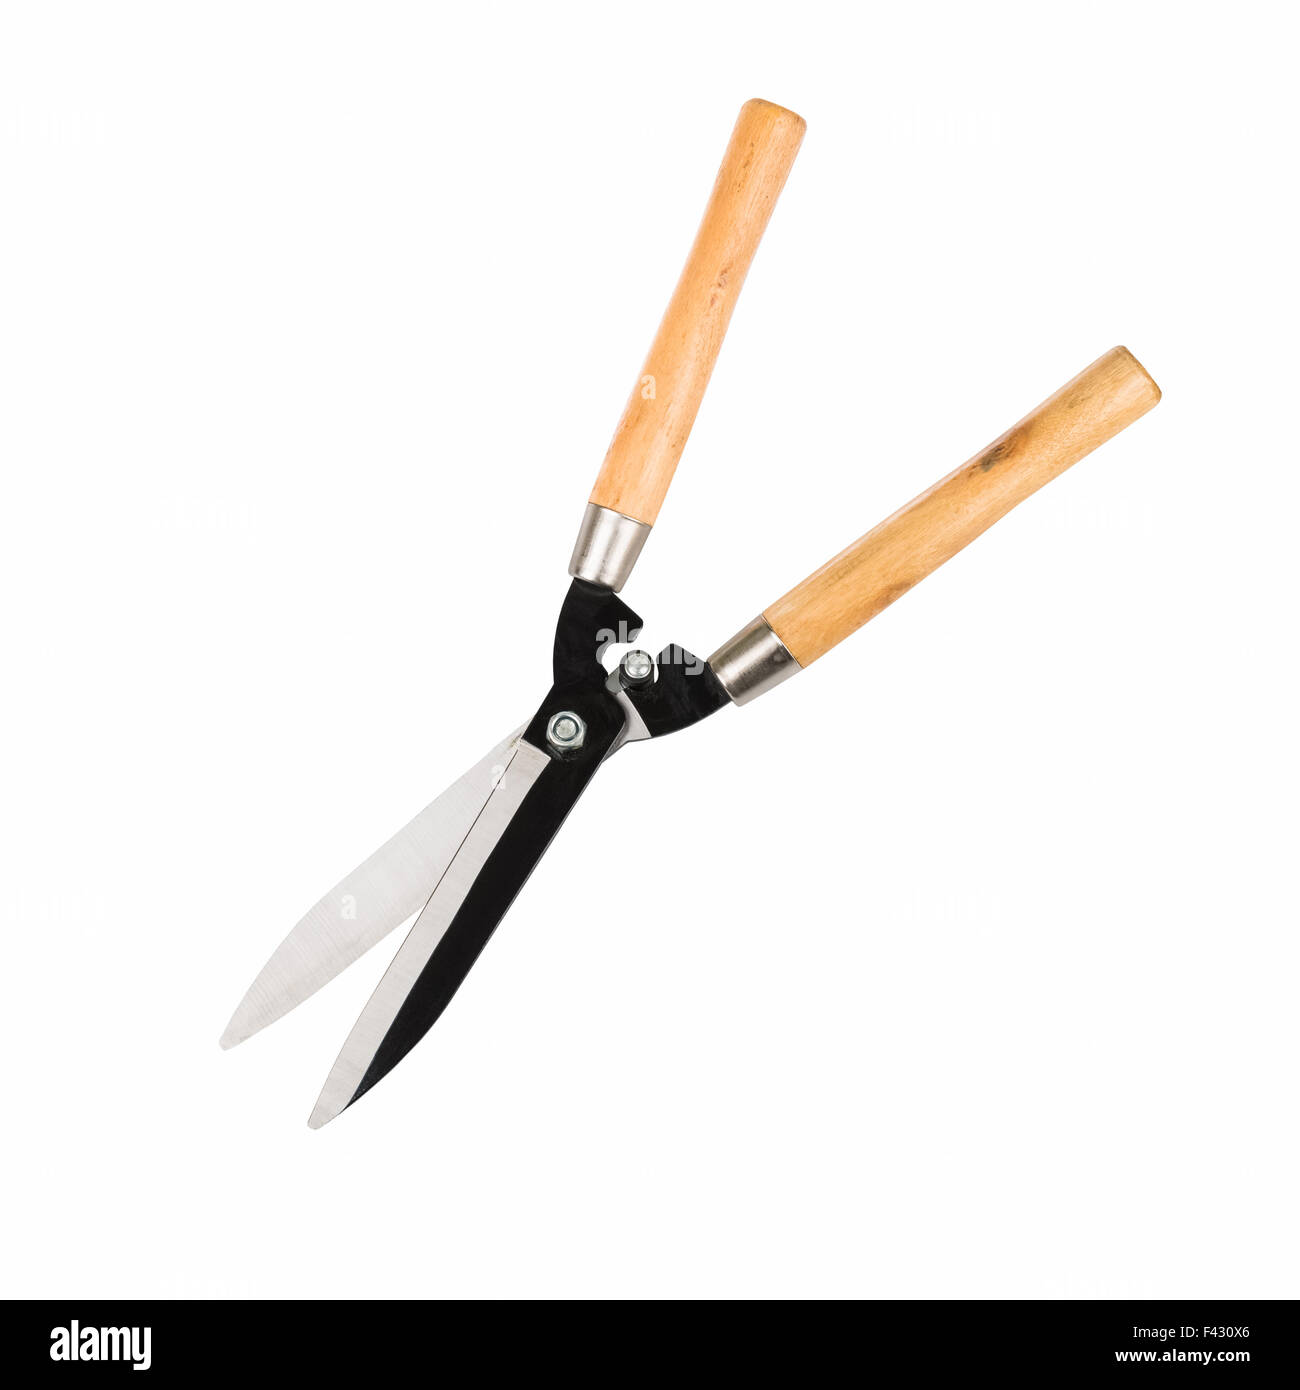 The best garden shears for trimming shrubs and bushes - Gardens Illustrated